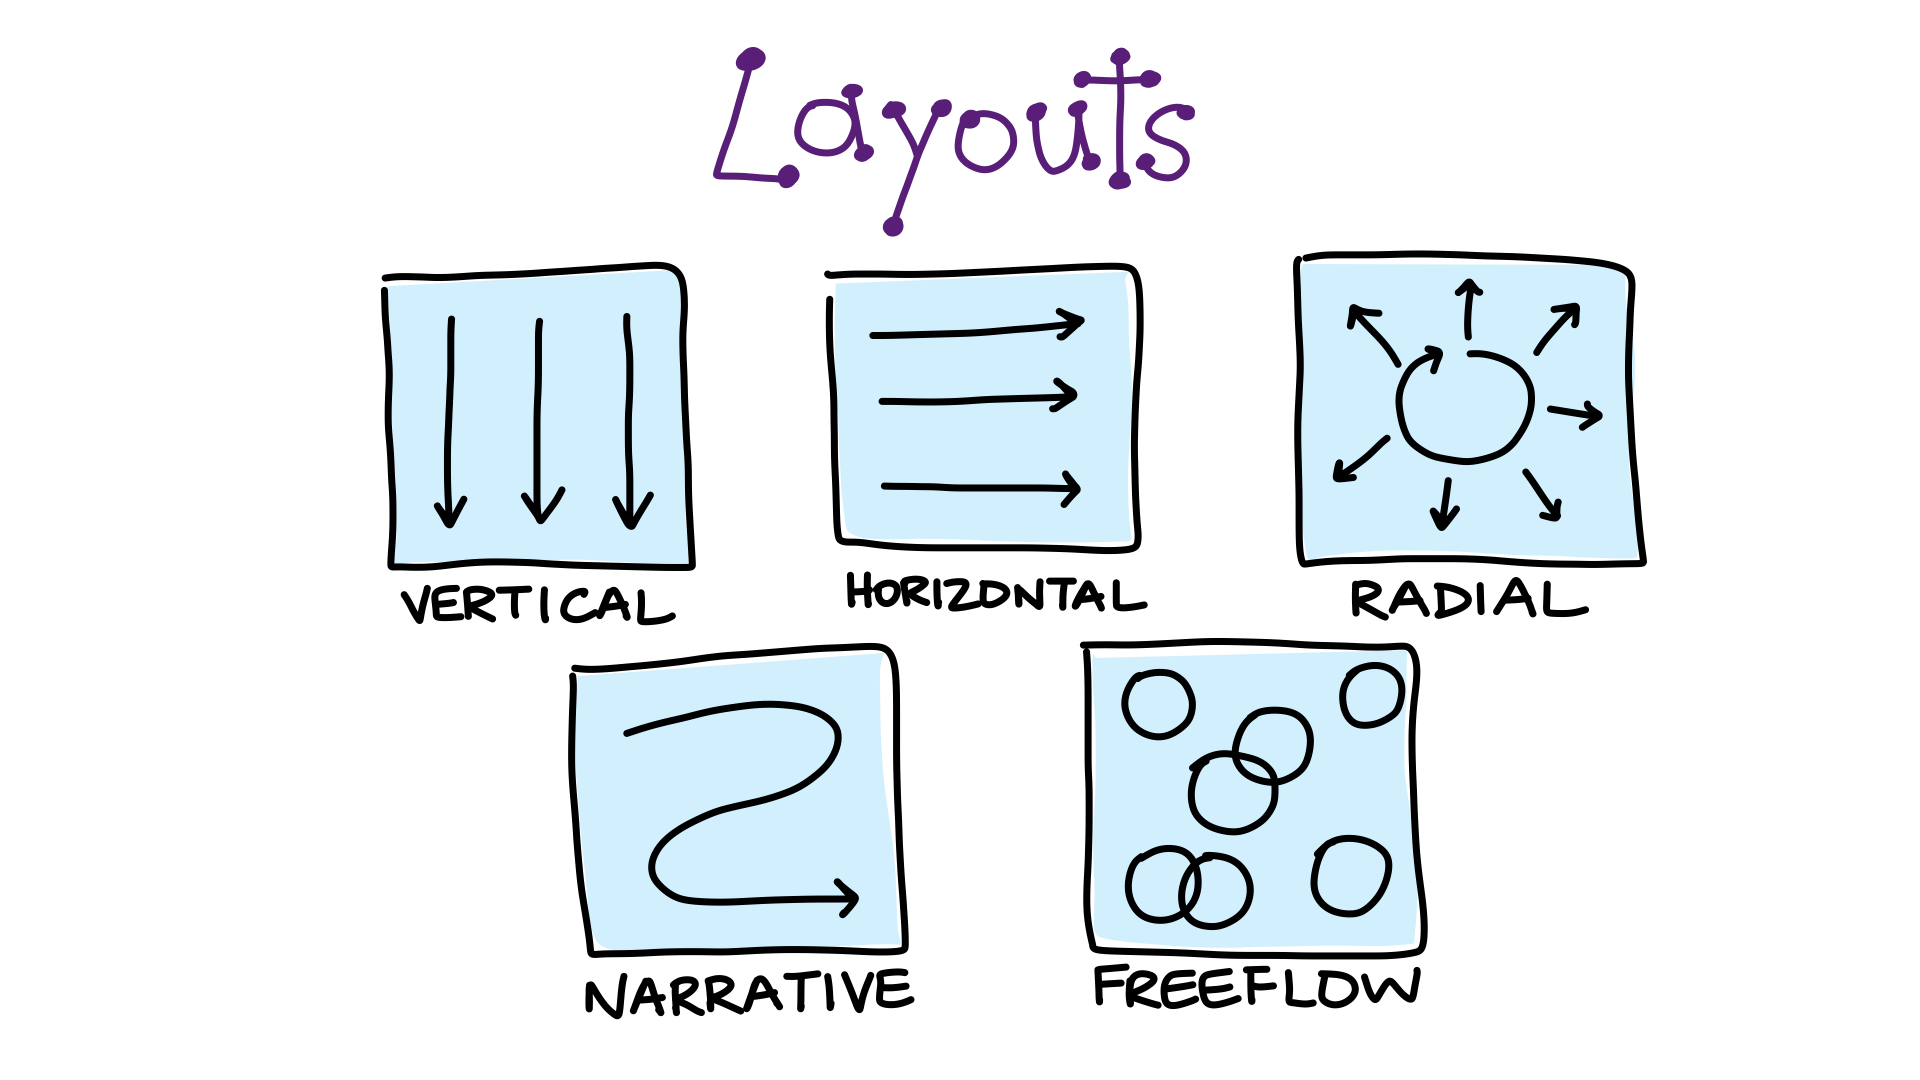 Sketchnotes can be laid out in 5 different ways: horizontally, vertically, radially, as a narrative flow, or freeflow.